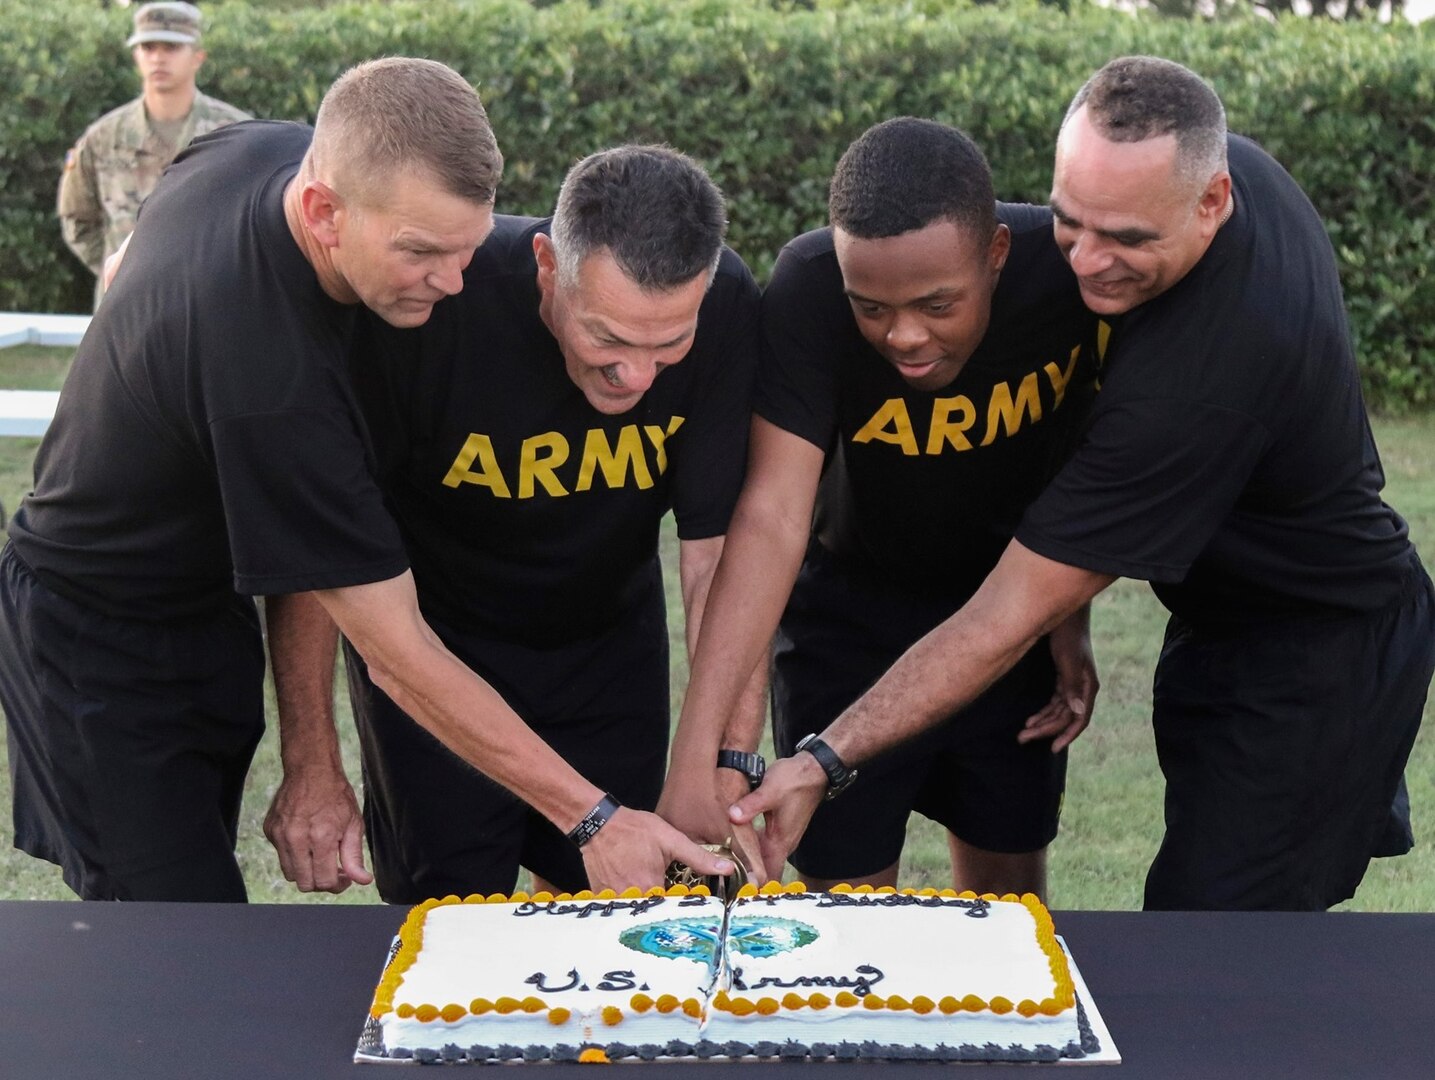 The oldest and youngest Soldiers present, Col. William Bruce (second from left), deputy director for Dental Directorate G-3/5/7, and Spc. Dazhir Walker (second from right), a musician with the 323d Army Band "Fort Sam's Own," joined Lt. Gen. Jeffrey S. Buchanan (far left), commanding general, U.S. Army North (Fifth Army), and ARNORTH Command Sgt. Maj. Alberto Delgado (far right)in the cake cutting ceremony after the Army Birthday Run June 13. Approximately 2,000 Soldiers celebrated the 244th Army Birthday with a 3 1/2-mile run and were joined by Airmen from throughout JBSA, as well as civilians, friends and family members. The run is one of several events the Army units participated in to celebrate the Army's birthday June 14.